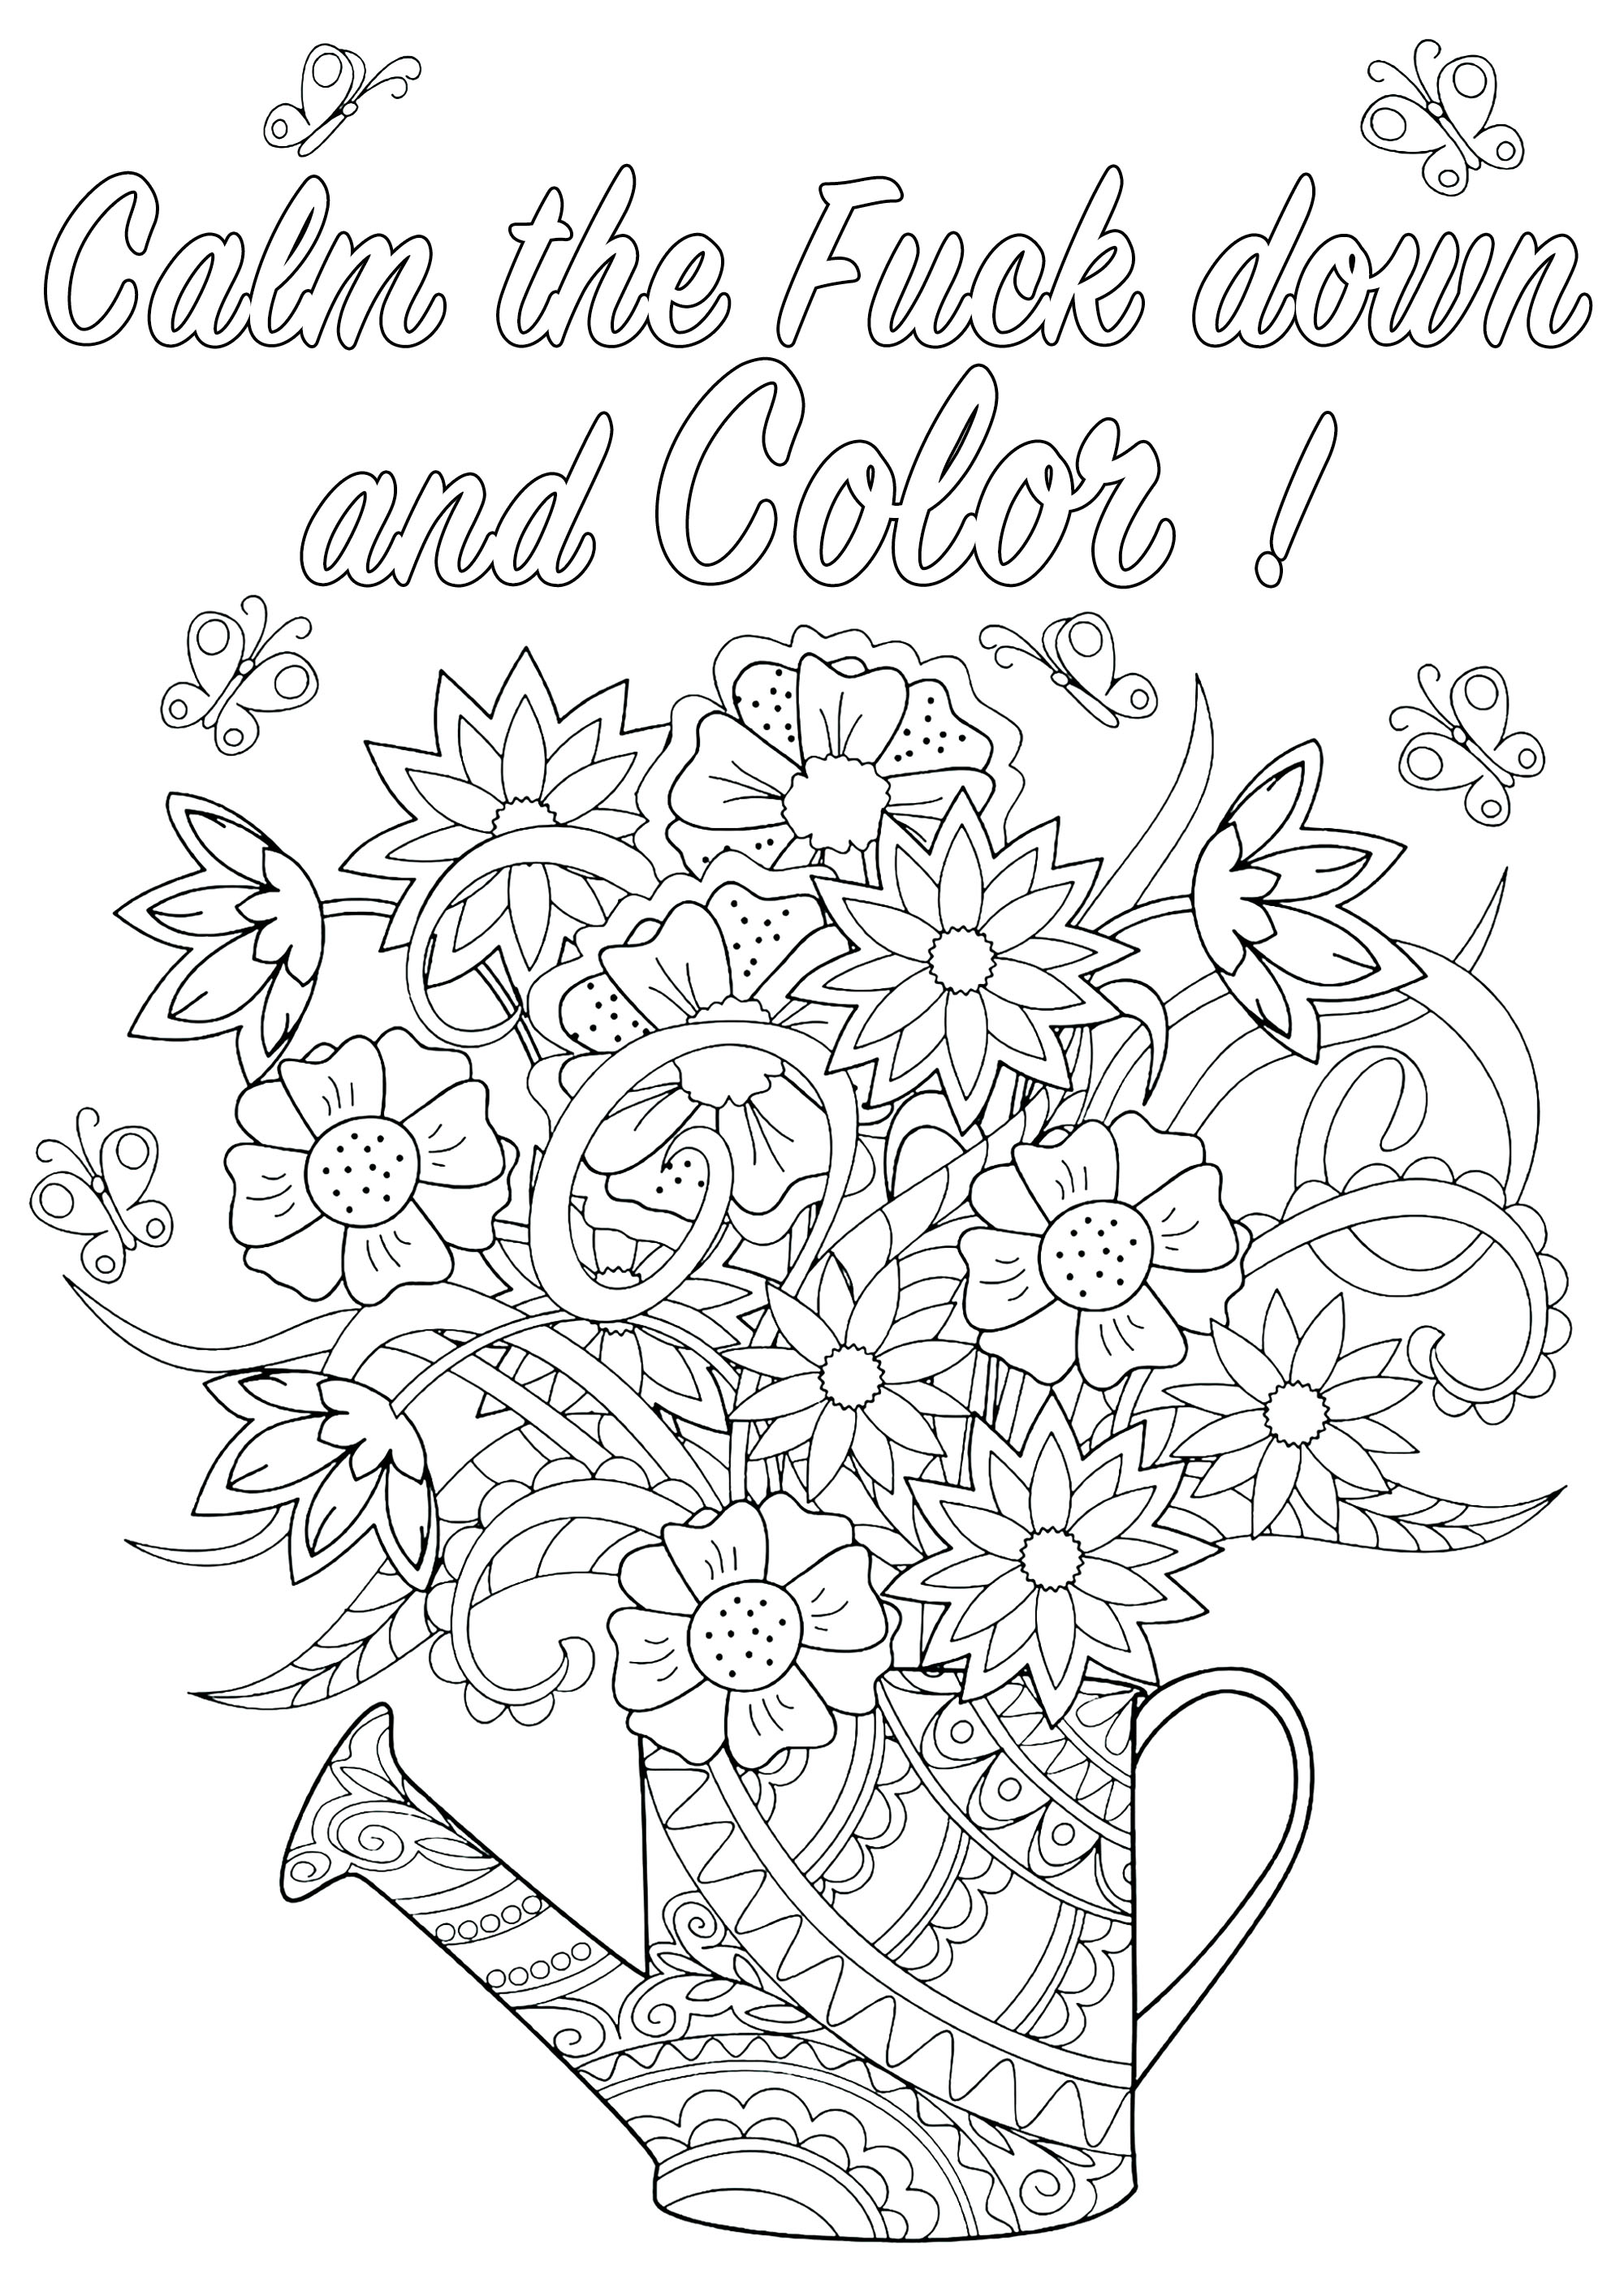 Calm the Fuck down and Color ! : Swear word coloring page with flowers in a watering can